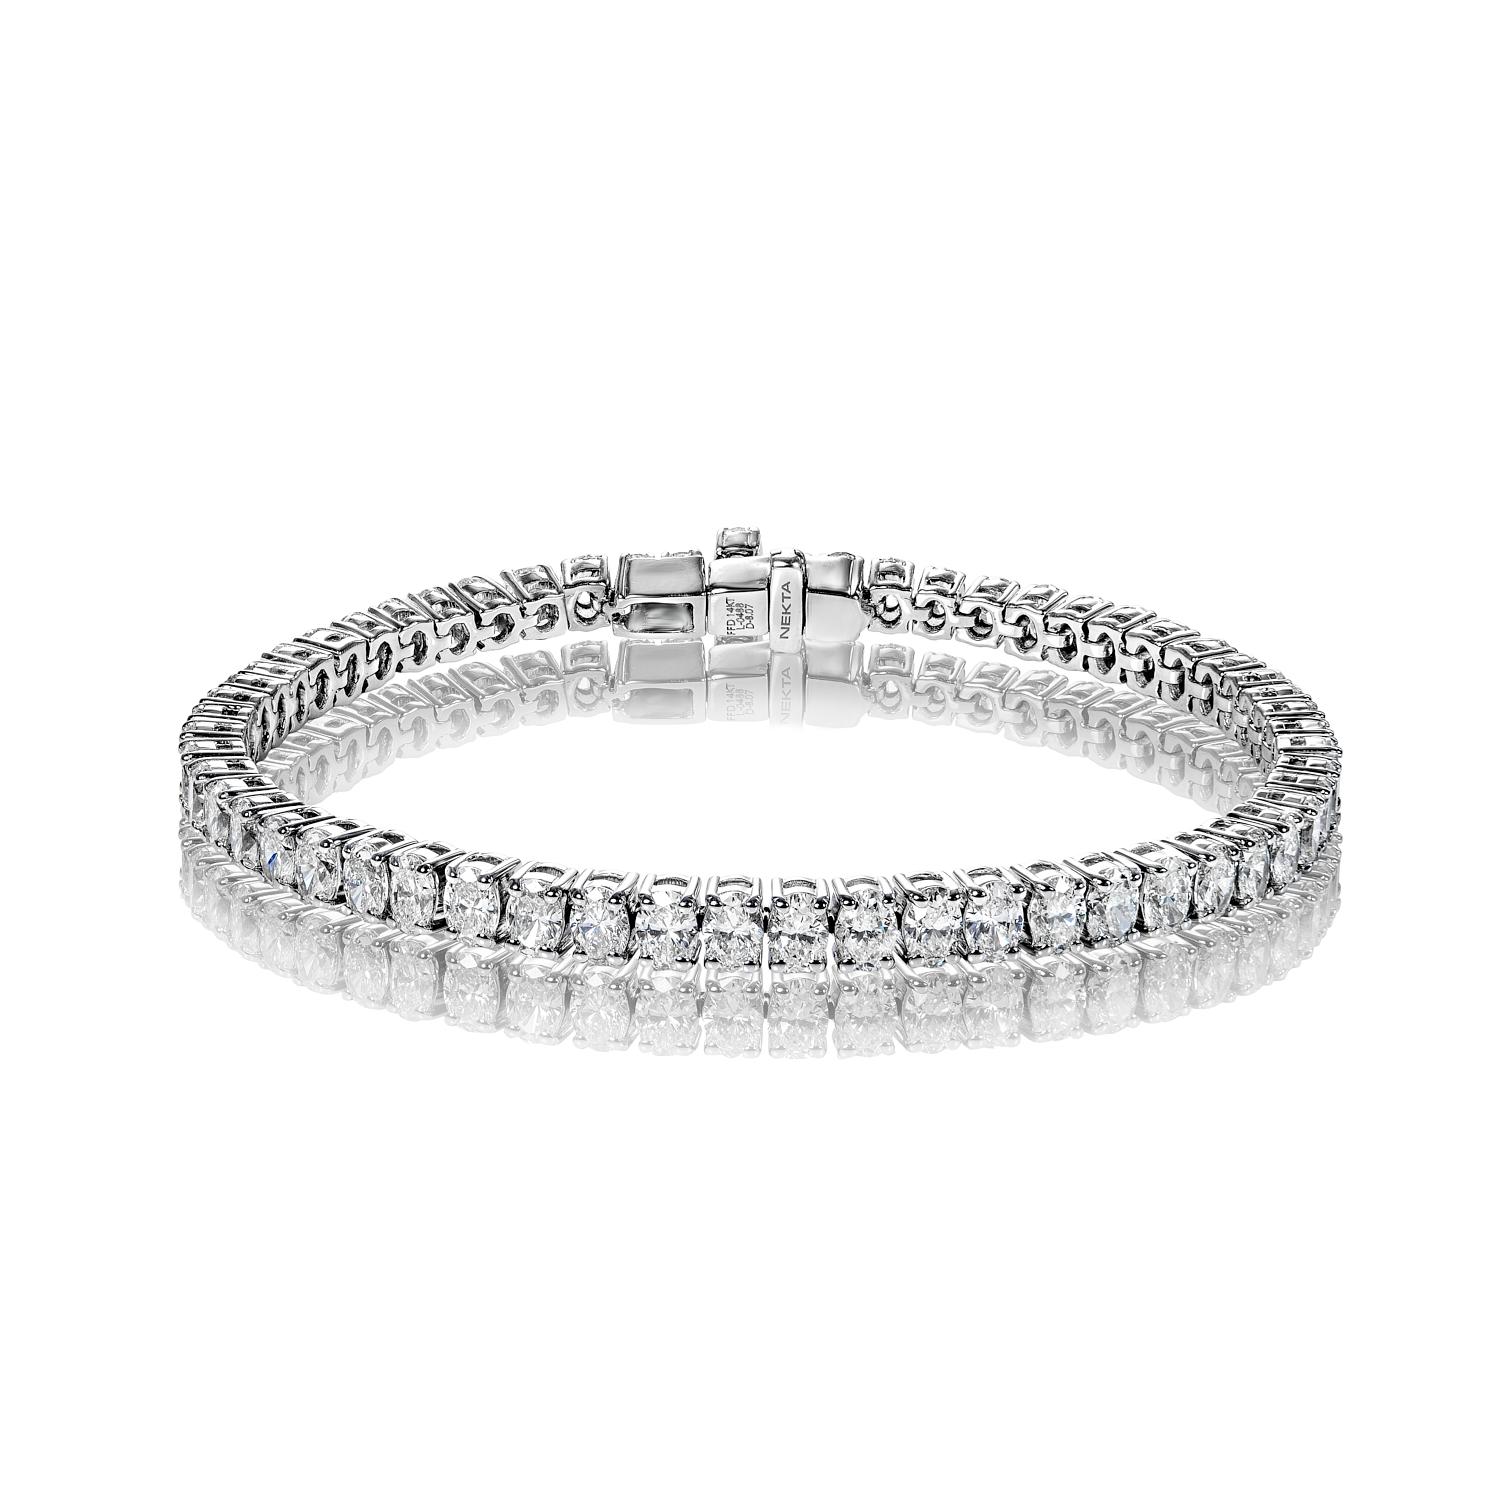 The VERONICA 8.07 Carat Single Row Diamond Tennis Bracelet features OVAL CUT DIAMONDS brilliants weighing a total of approximately 8.07 carats, set in 14K White Gold.

Style: Single Row Diamond Tennis Bracelet
Diamonds
Diamond Size: 8.07